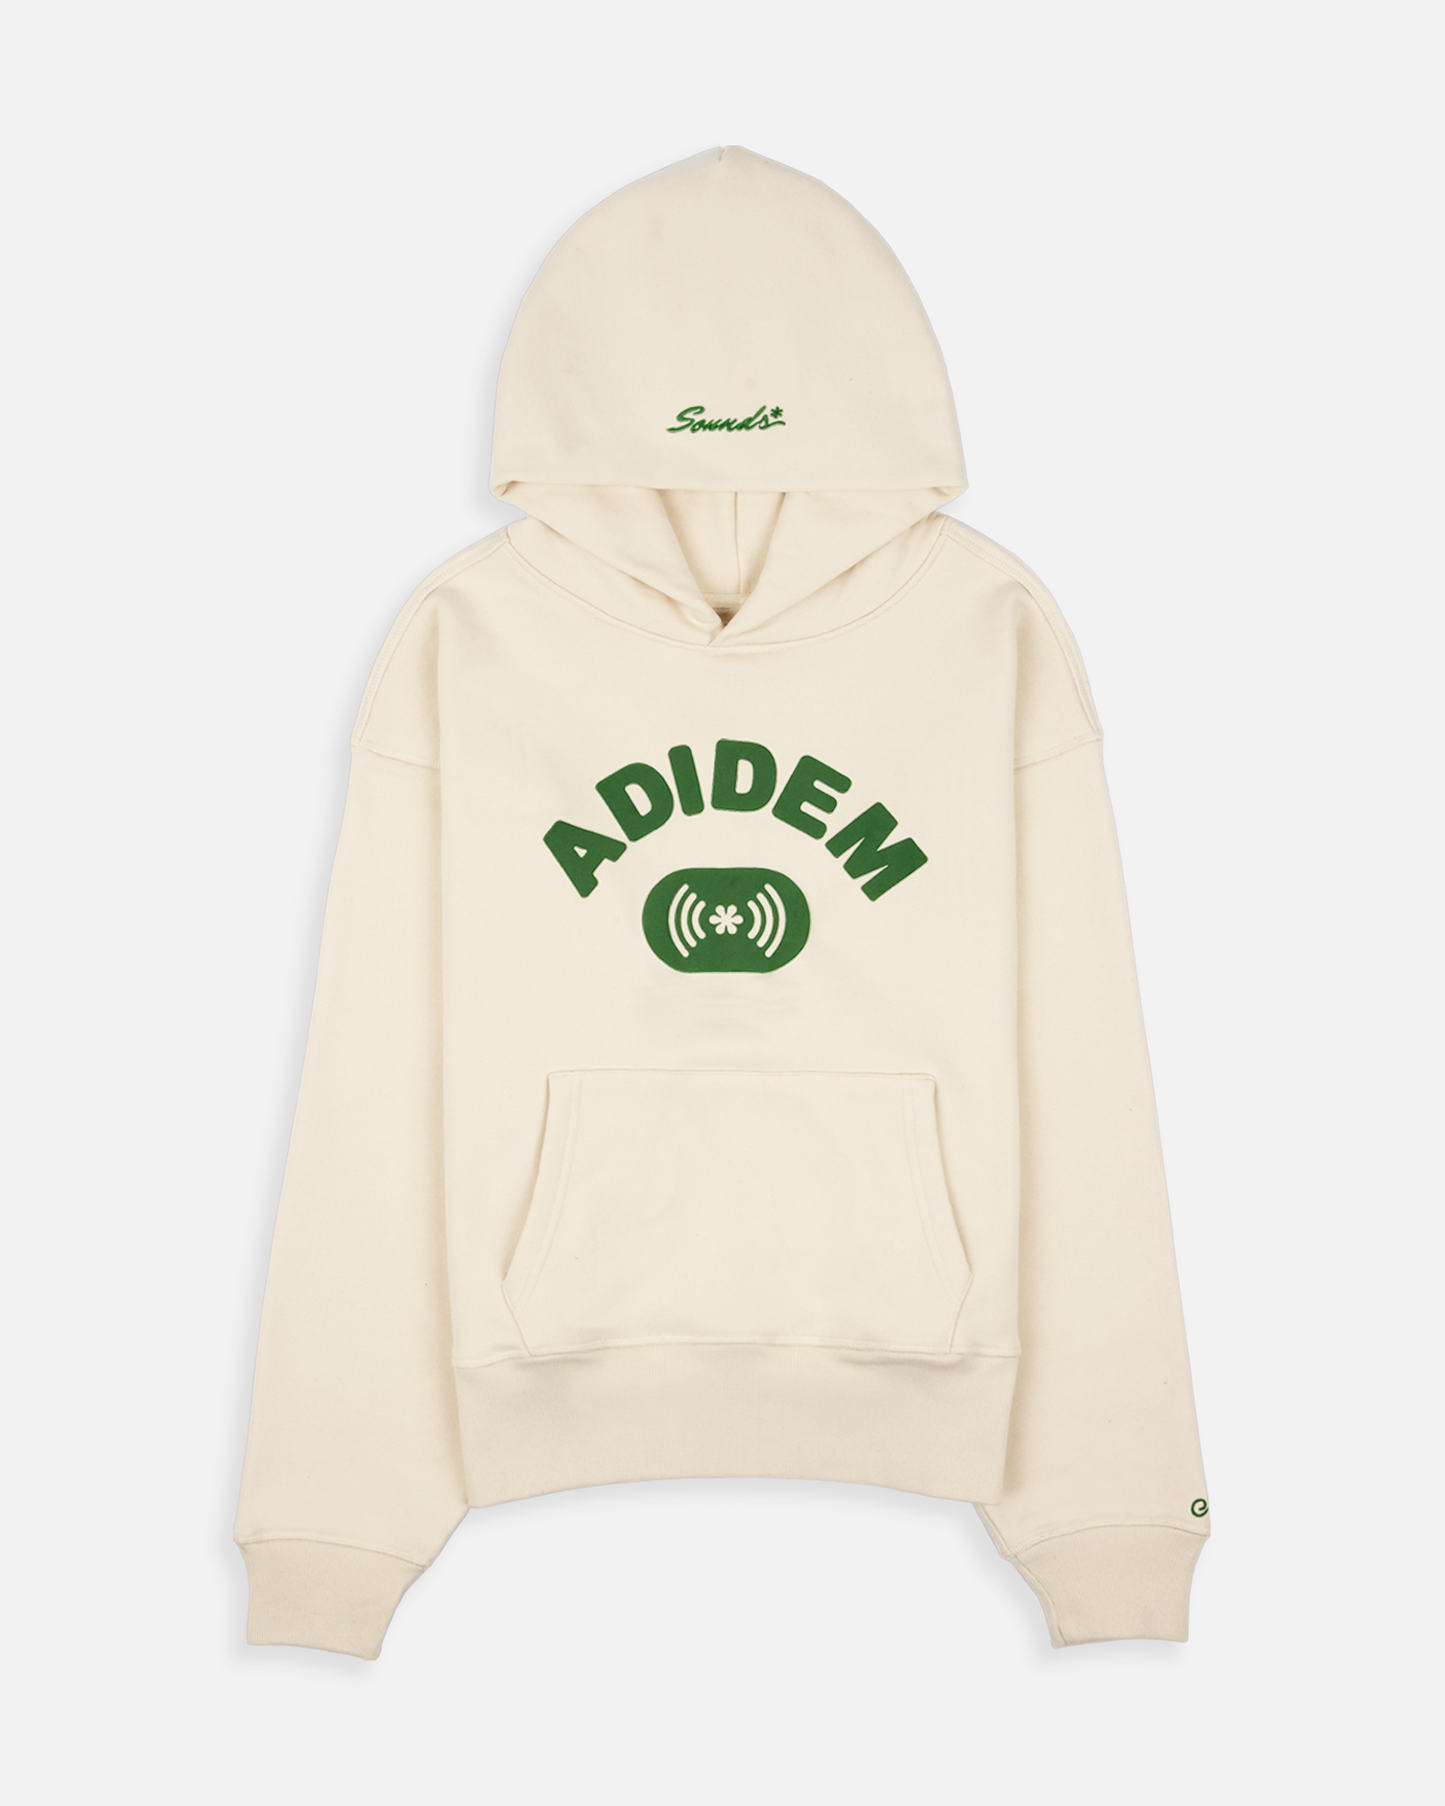 Sounds© Hoodie